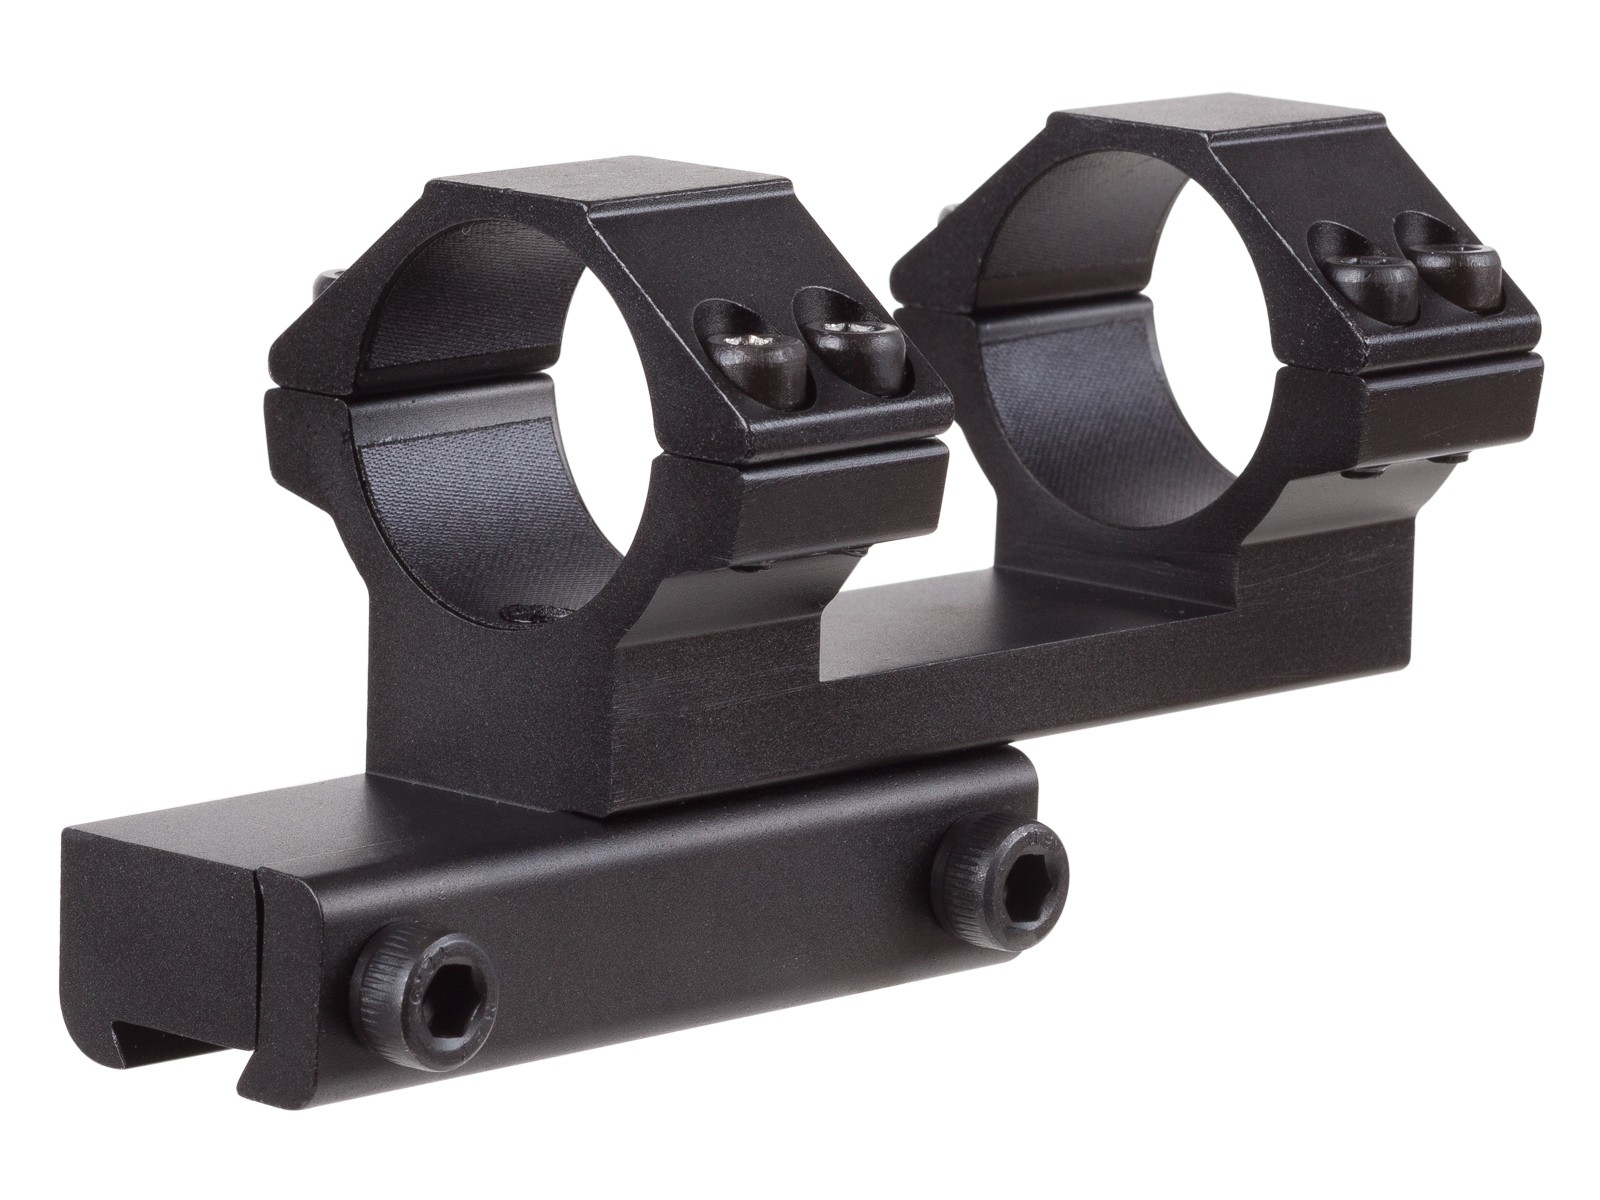 Leapers Accushot 1-Pc Bi-directional Offset Mount w/1 Rings, High, 11mm Dovetail